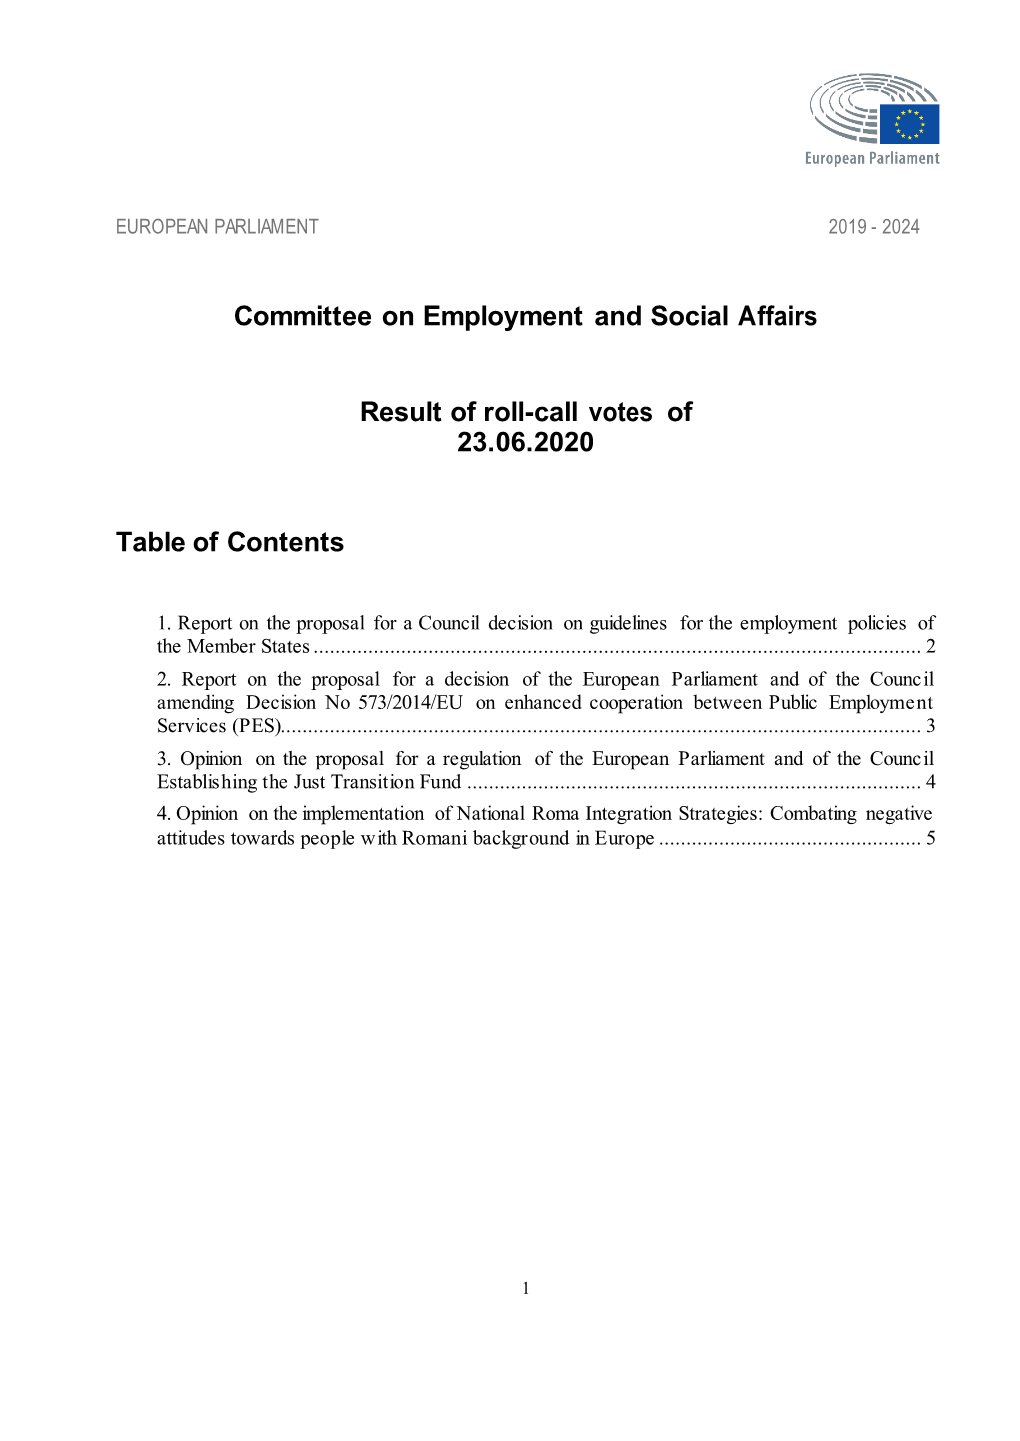 Committee on Employment and Social Affairs Result of Roll-Call Votes of 23.06.2020 Table of Contents